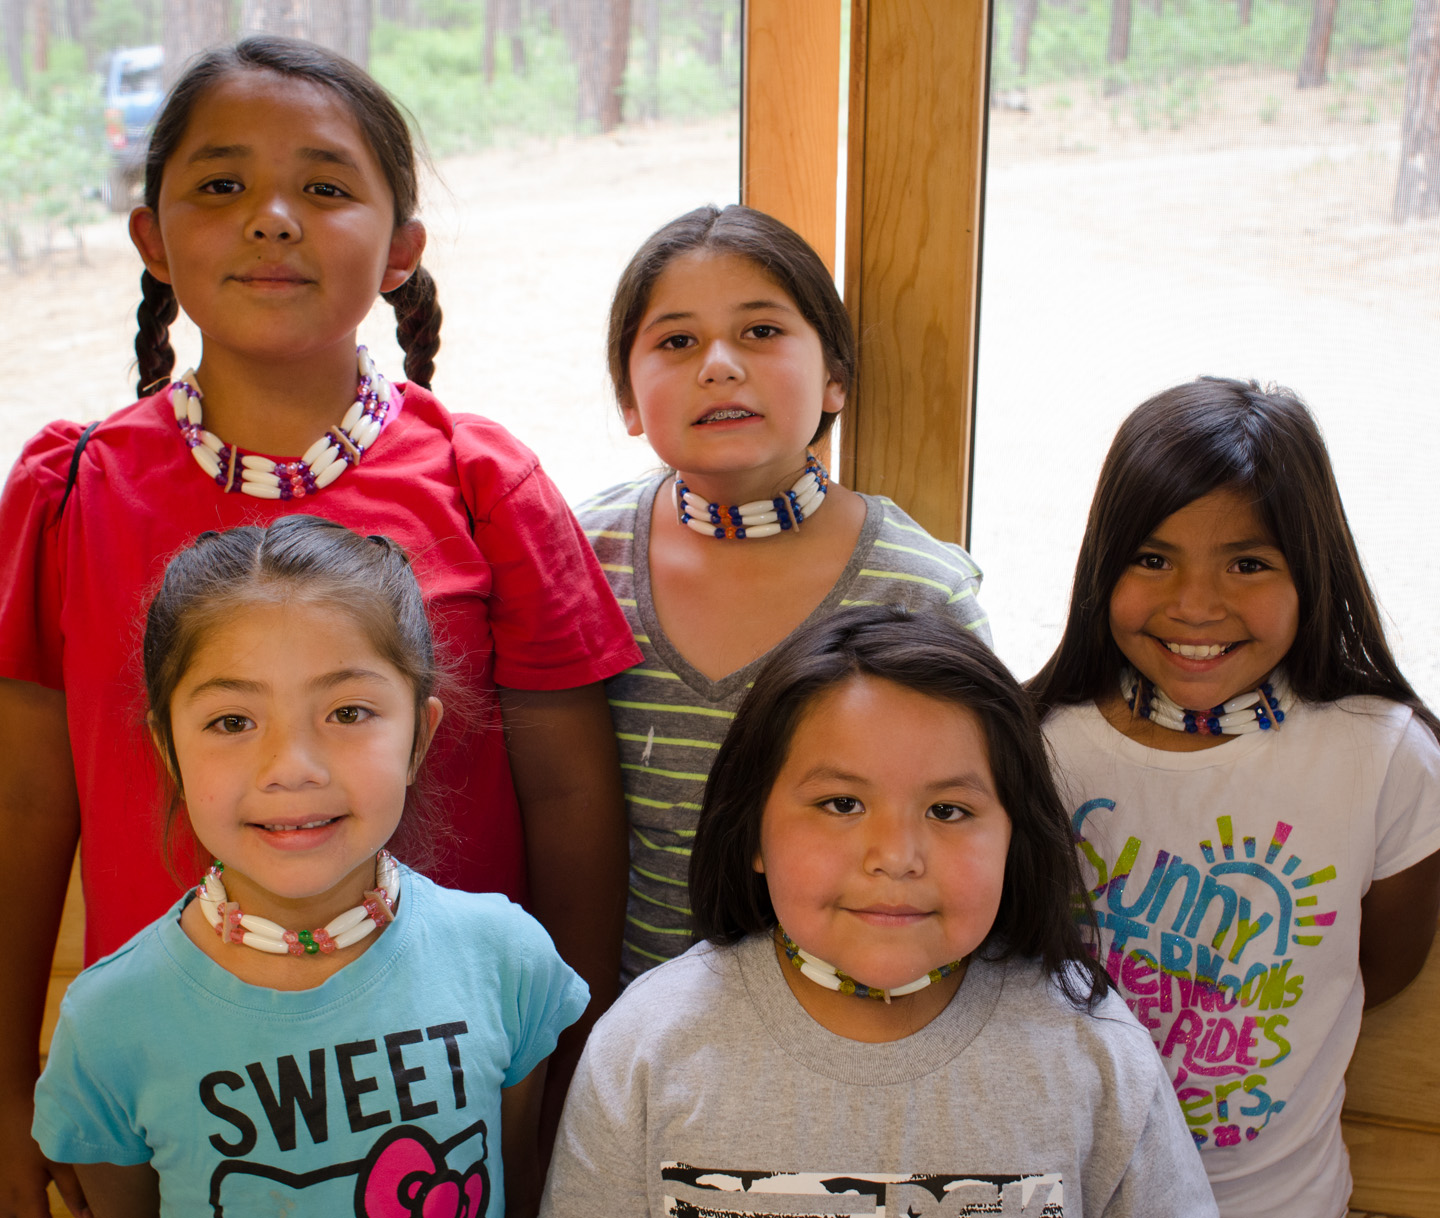 Younger students completed their own Chokers during the Ute crafts making portion of the Culture Camp.